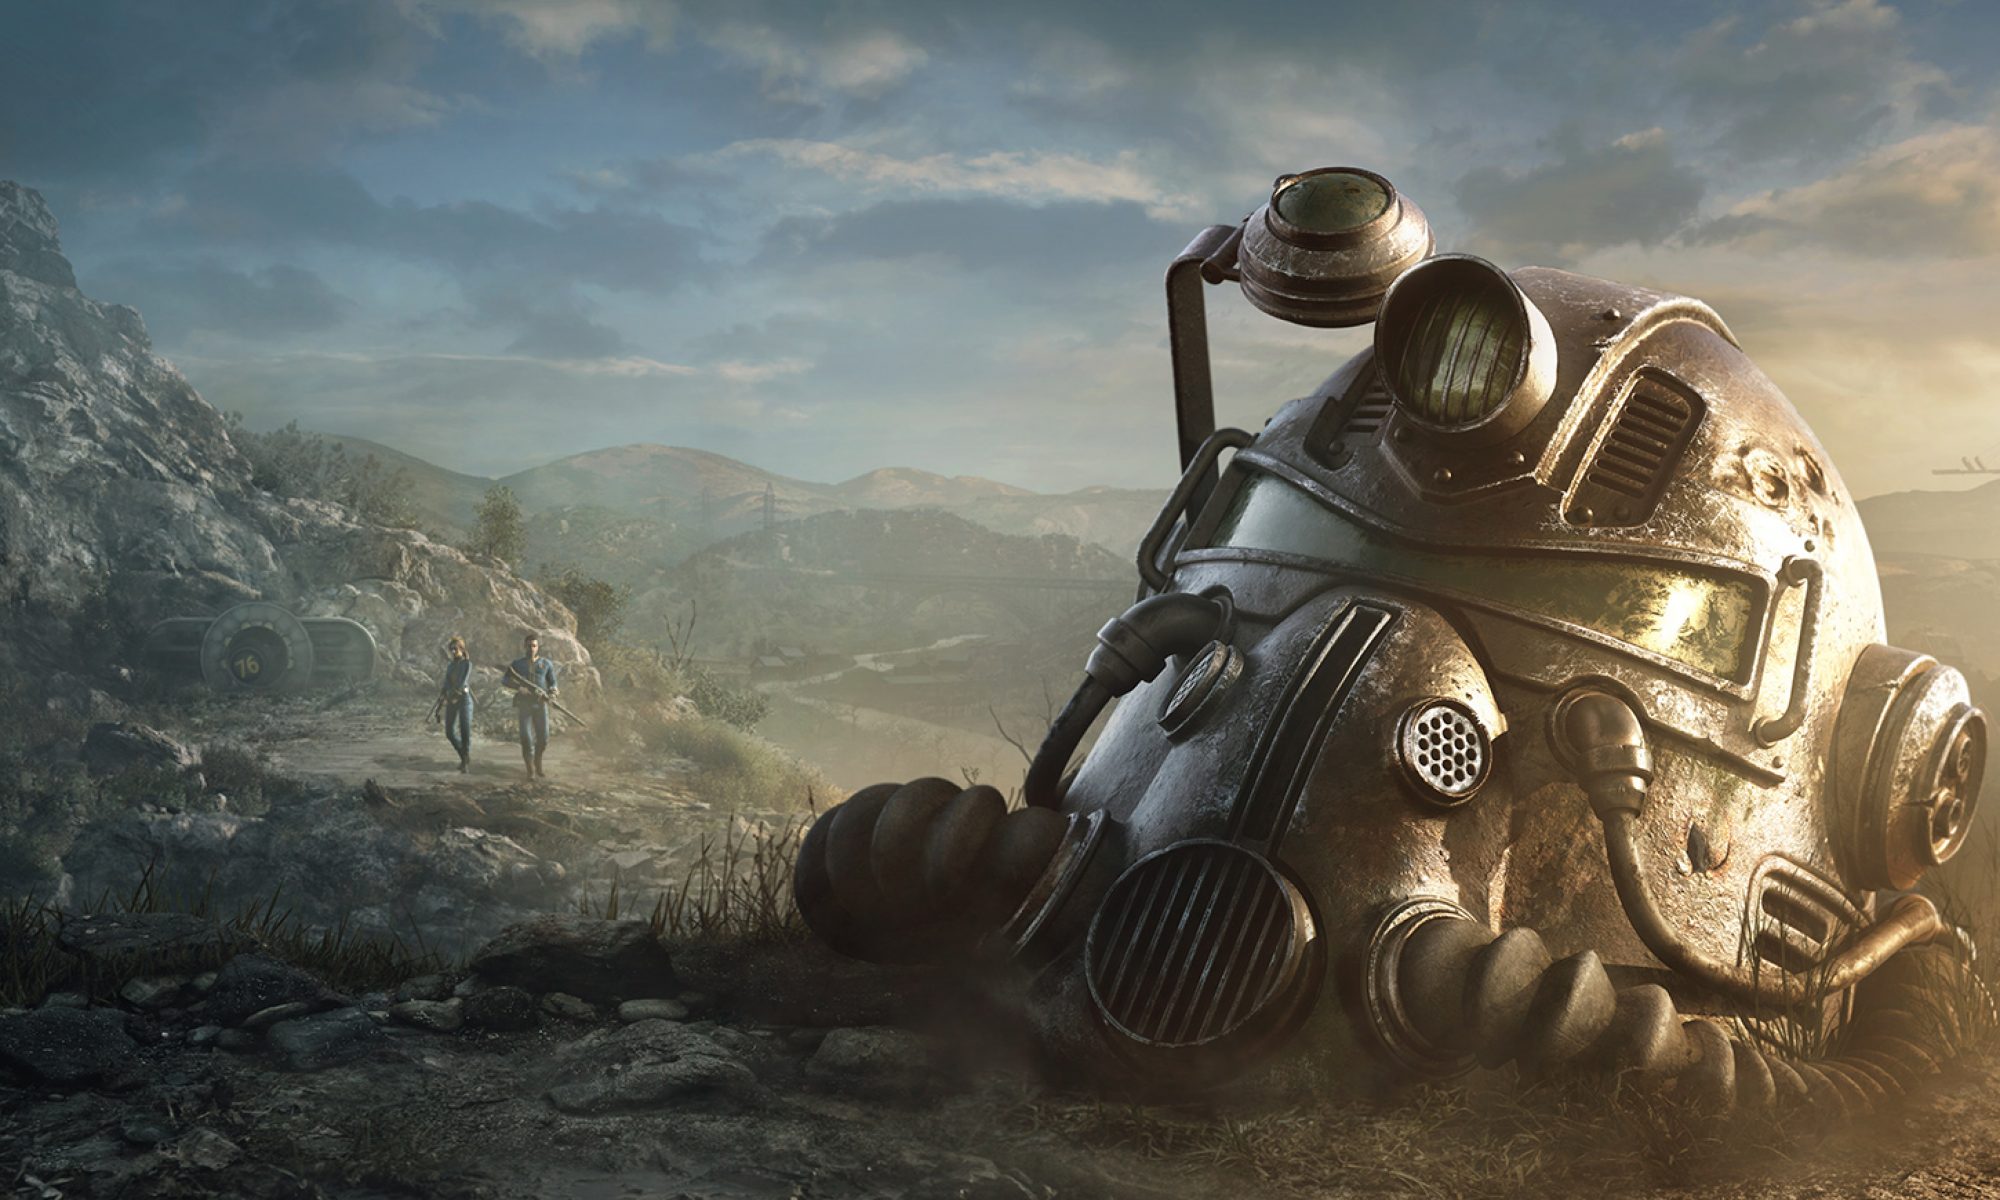 Fallout Helmet Sold By Gamestop Recalled Because It S Prone To